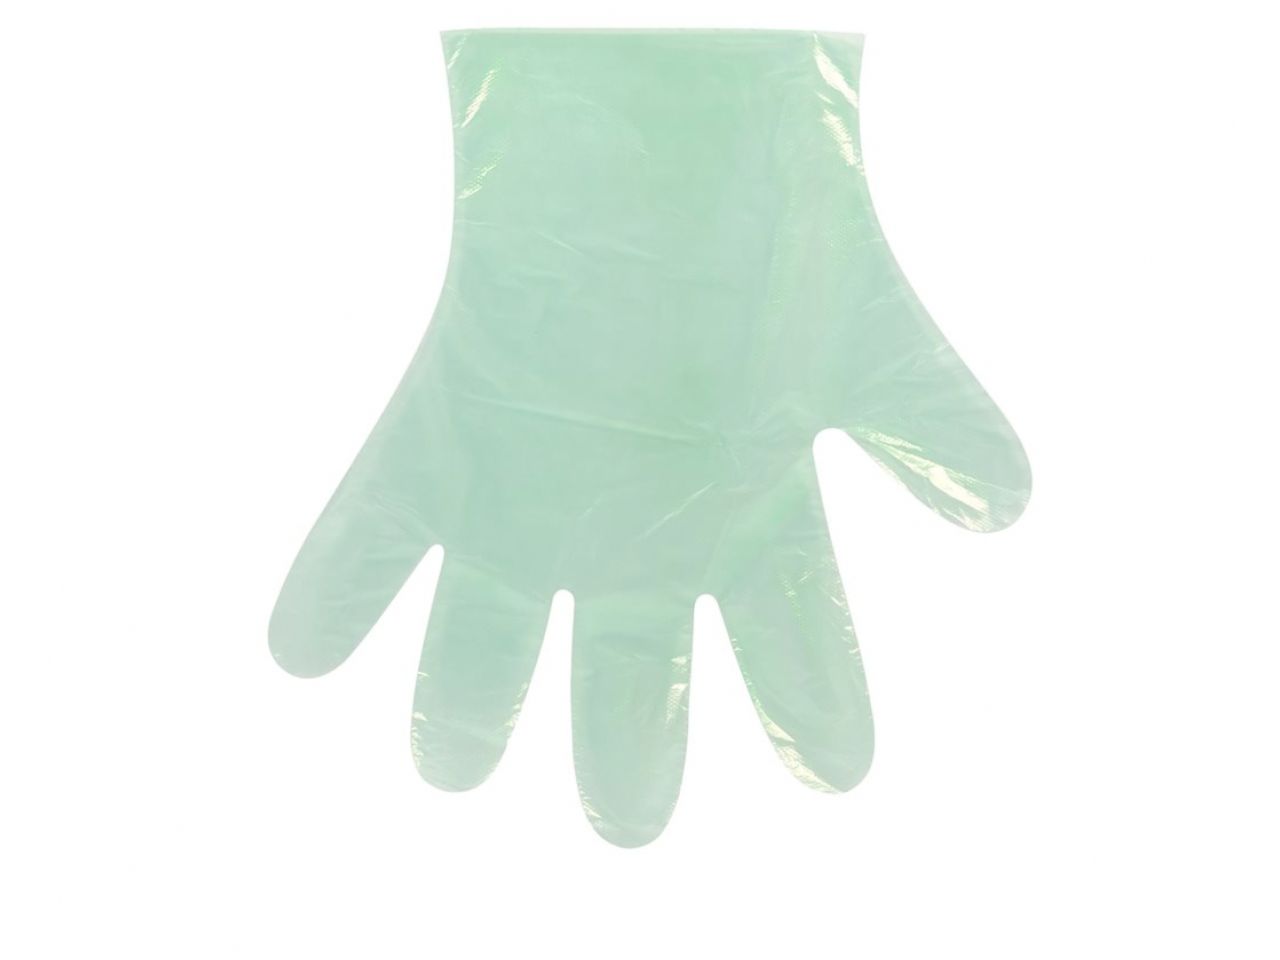 Camco Disposable Dump Gloves - 100 ct Light Green